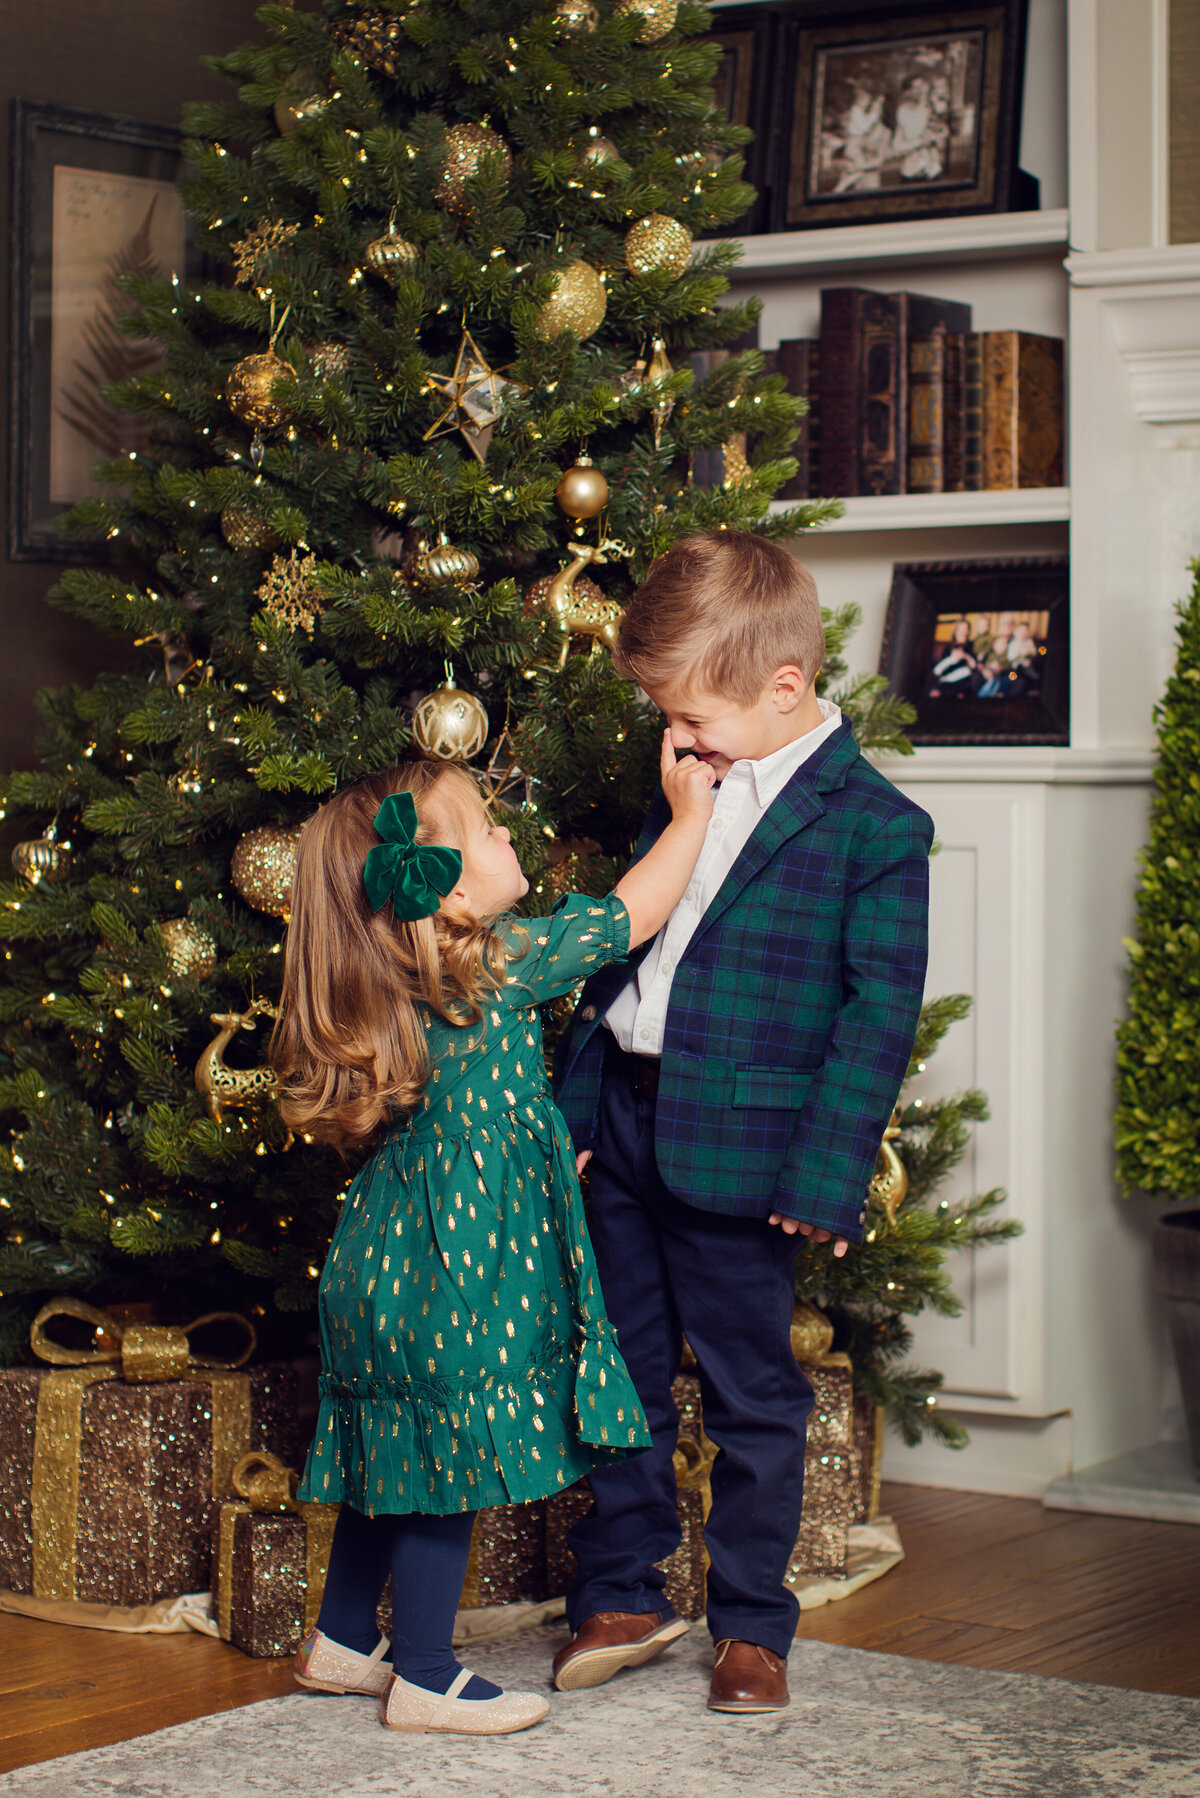 It's Christmas time and the tree is up. Kids dressed up in blue and green, she is touching her brother's nose gently, he is laughing at her.